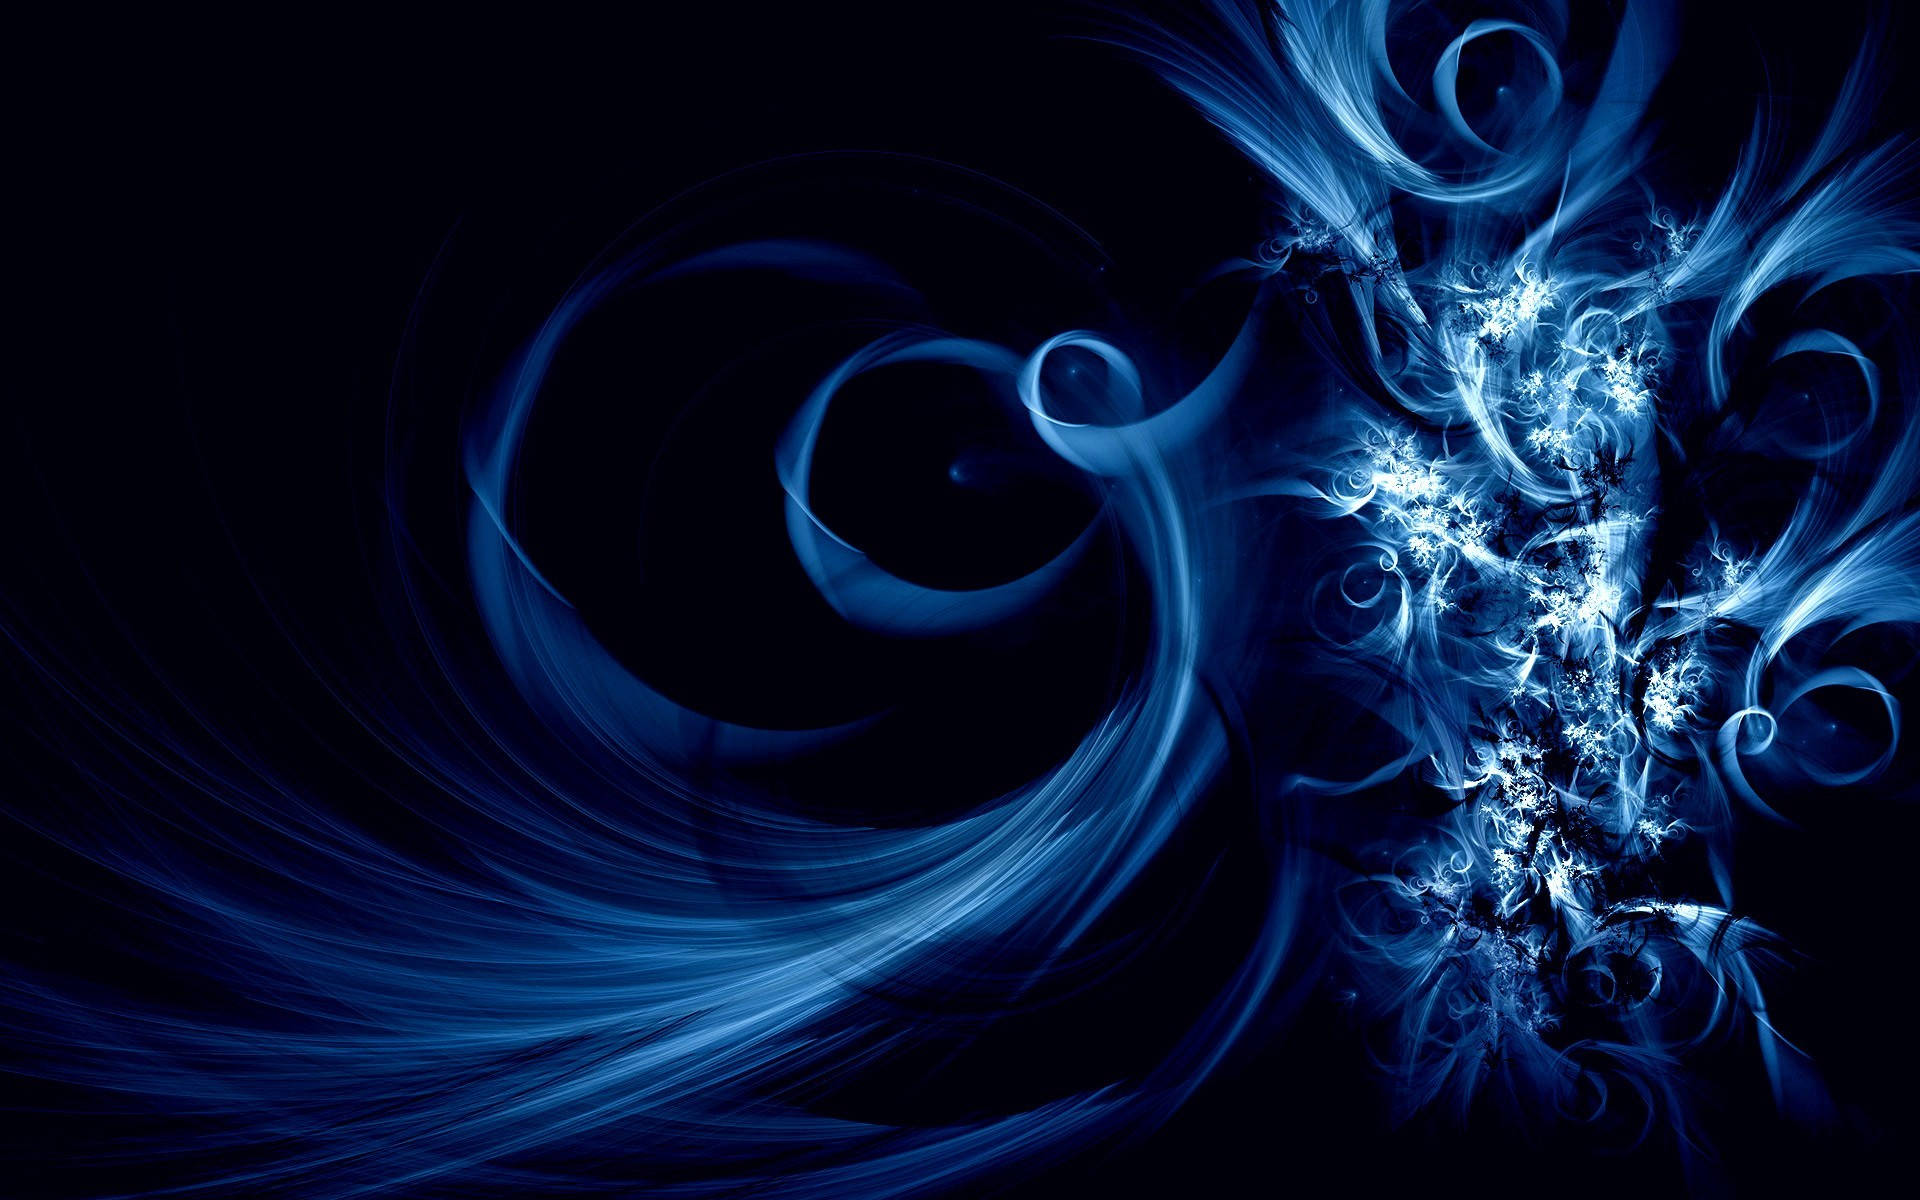 Black And Blue Smoke Abstract Background